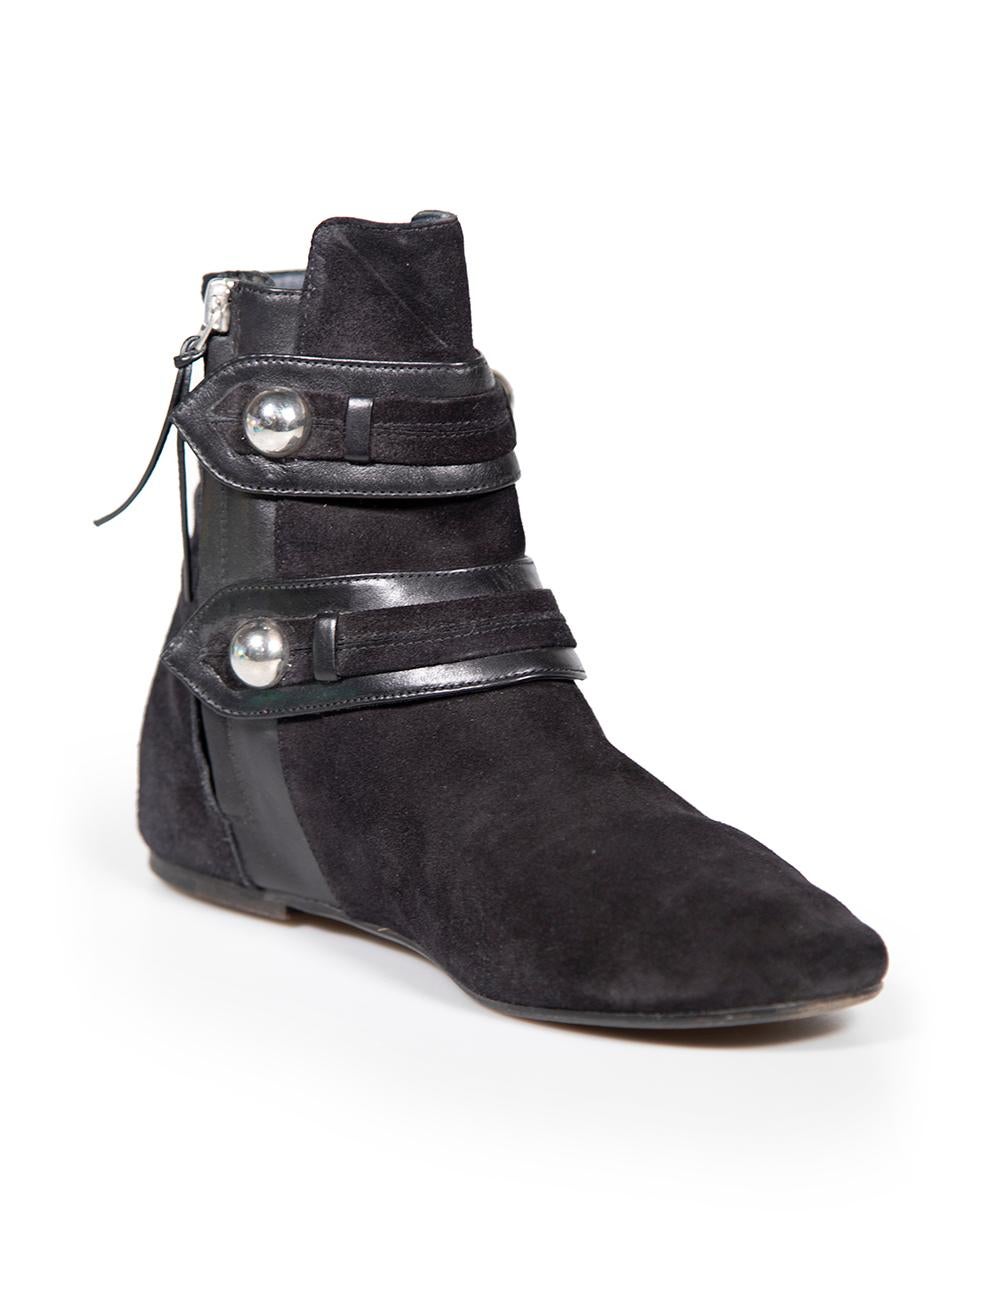 CONDITION is Very good. Minimal wear to boots is evident. Minimal wear to soles on this used Isabel Marant designer resale item.
 
 
 
 Details
 
 
 Black
 
 Suede
 
 Ankle boots
 
 Round toe
 
 Side zip fastening
 
 Front buttoned detail
 
 
 
 
 
